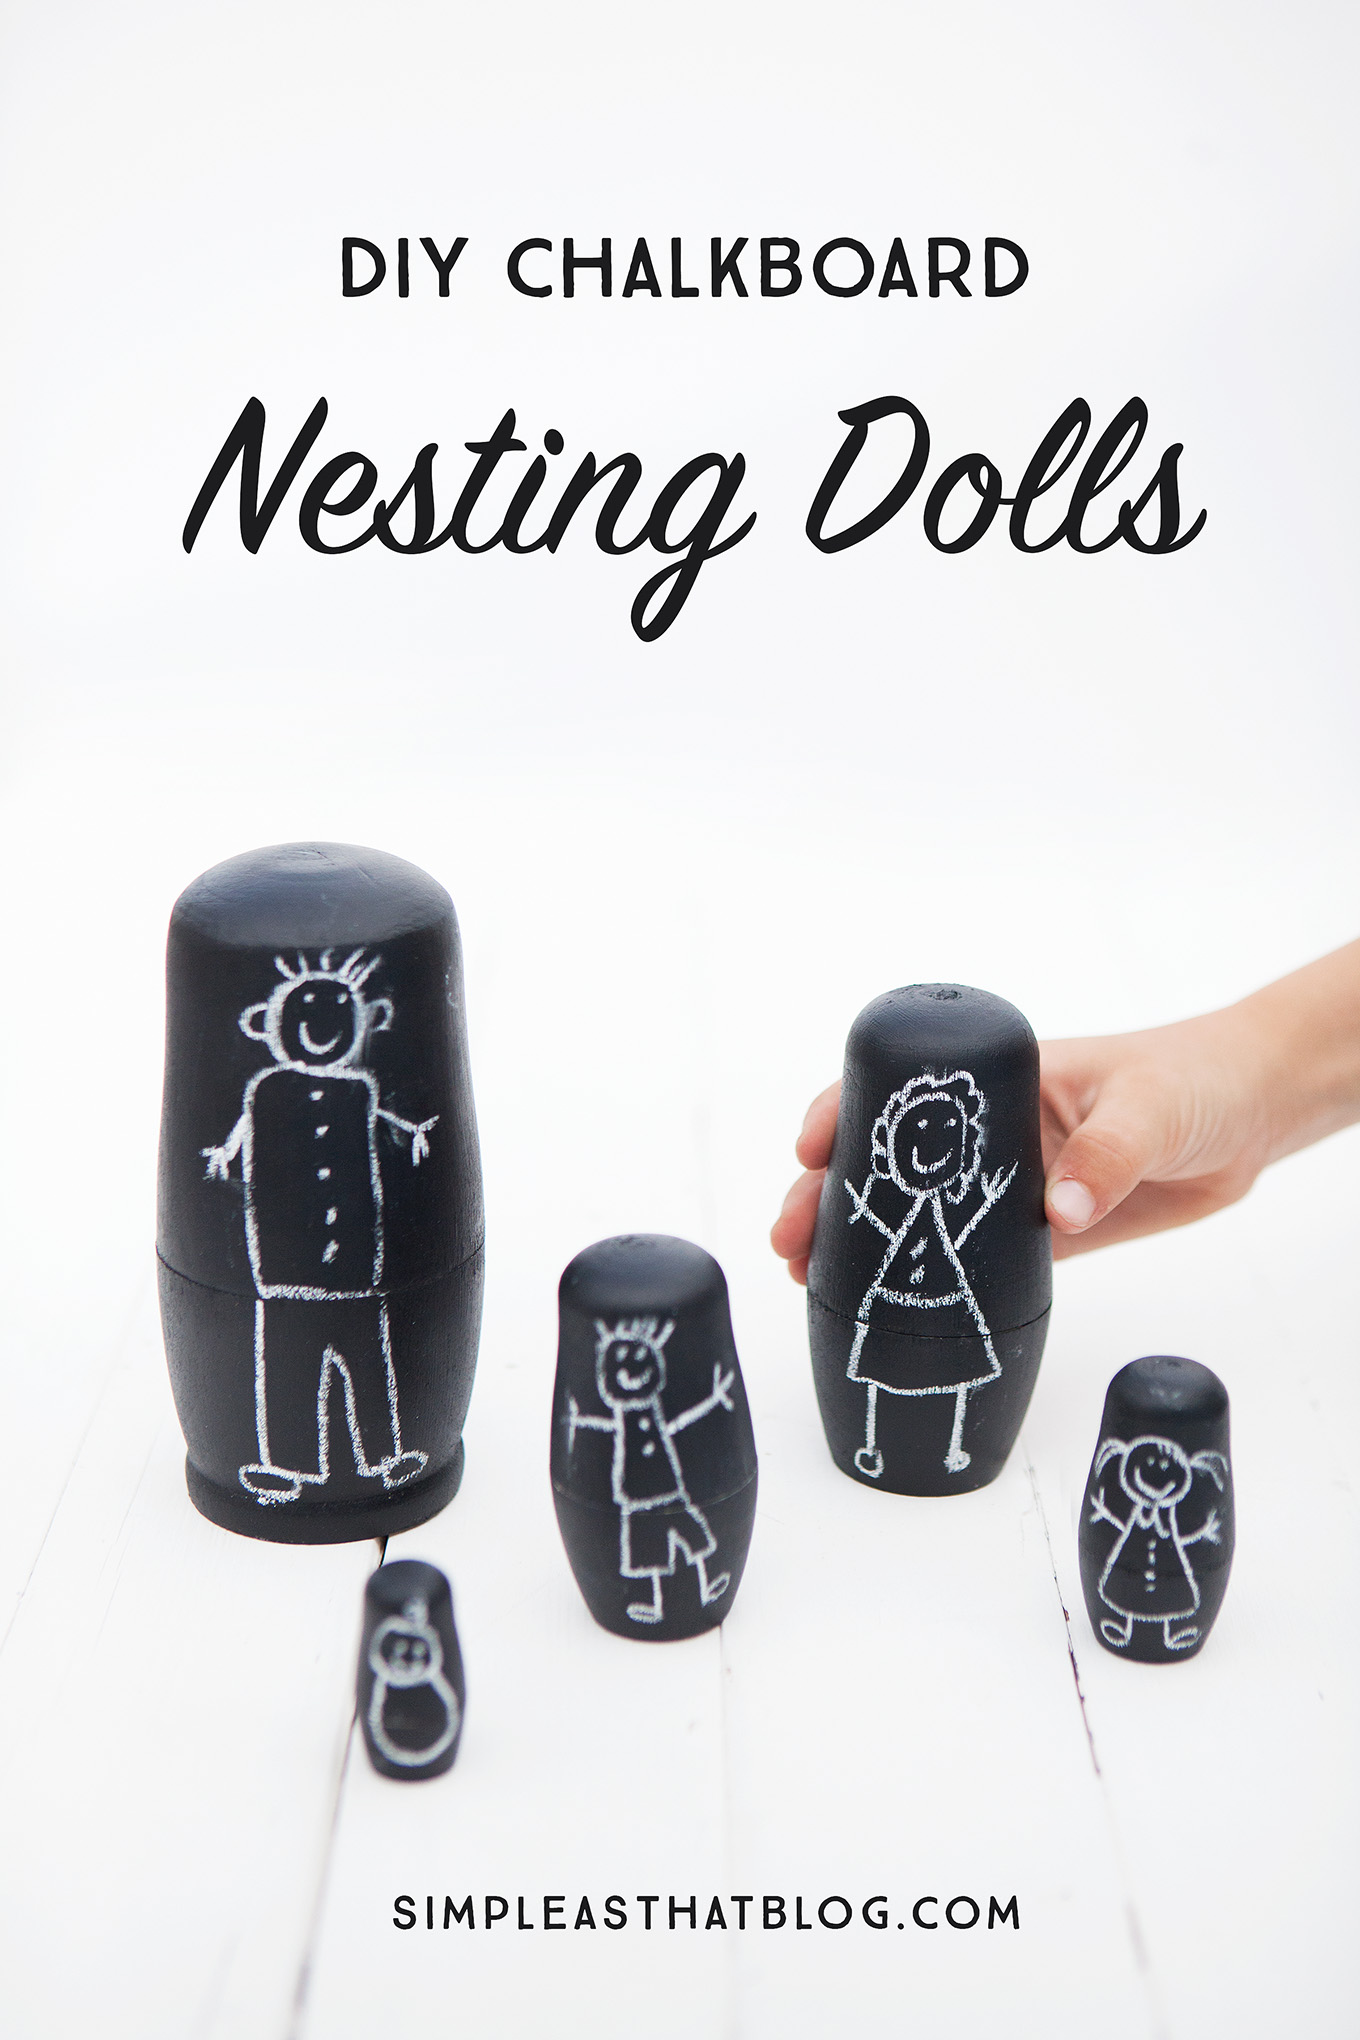 These DIY Chalkboard Matryoshka Nesting Dolls are an adorable, handmade toy your kids will love making! They can personalize the dolls again and again with nothing more than a piece of chalk.